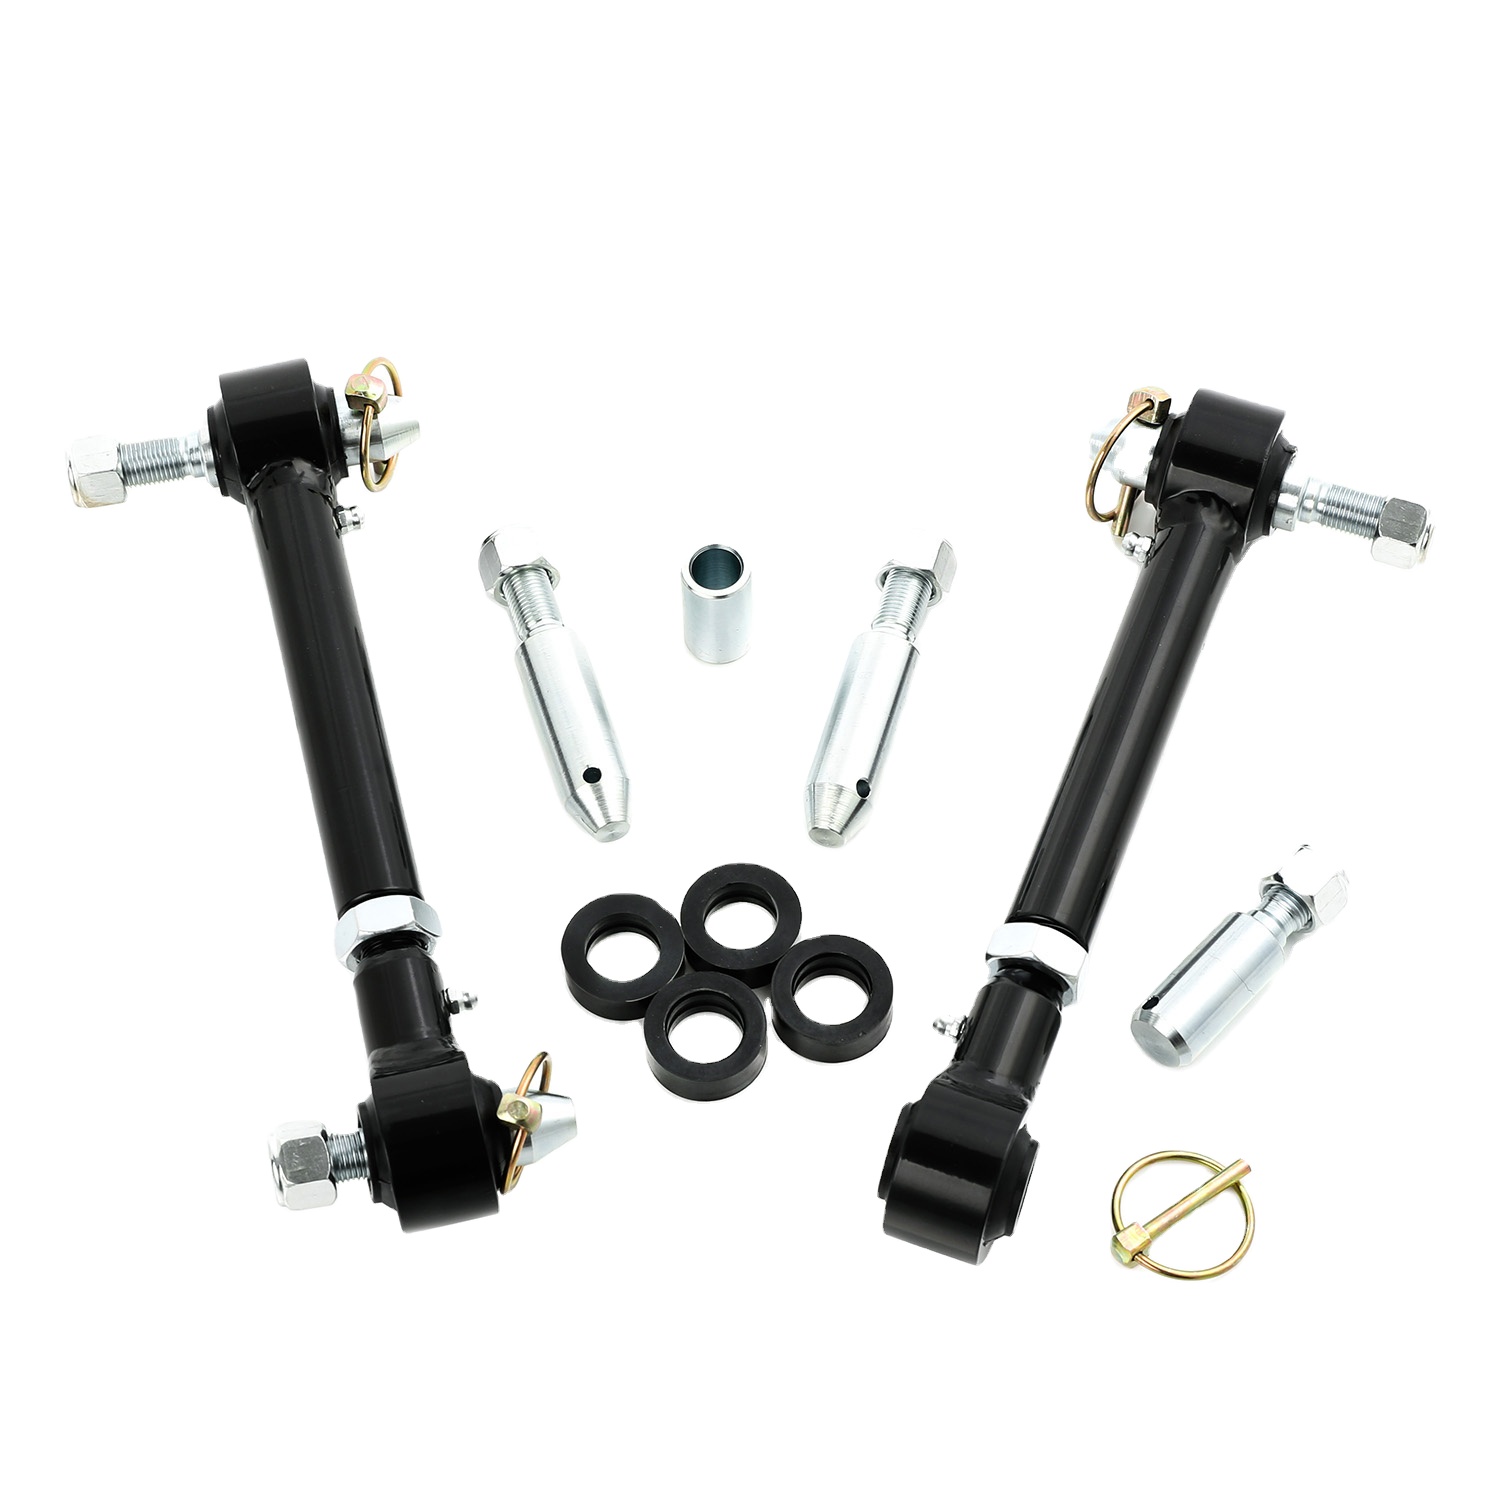 FAPO High Quality Sway Bar Adjustable Quick Disconnects  for Jeep Wrangle JK/JL 3-5 inch Lift PZ071910